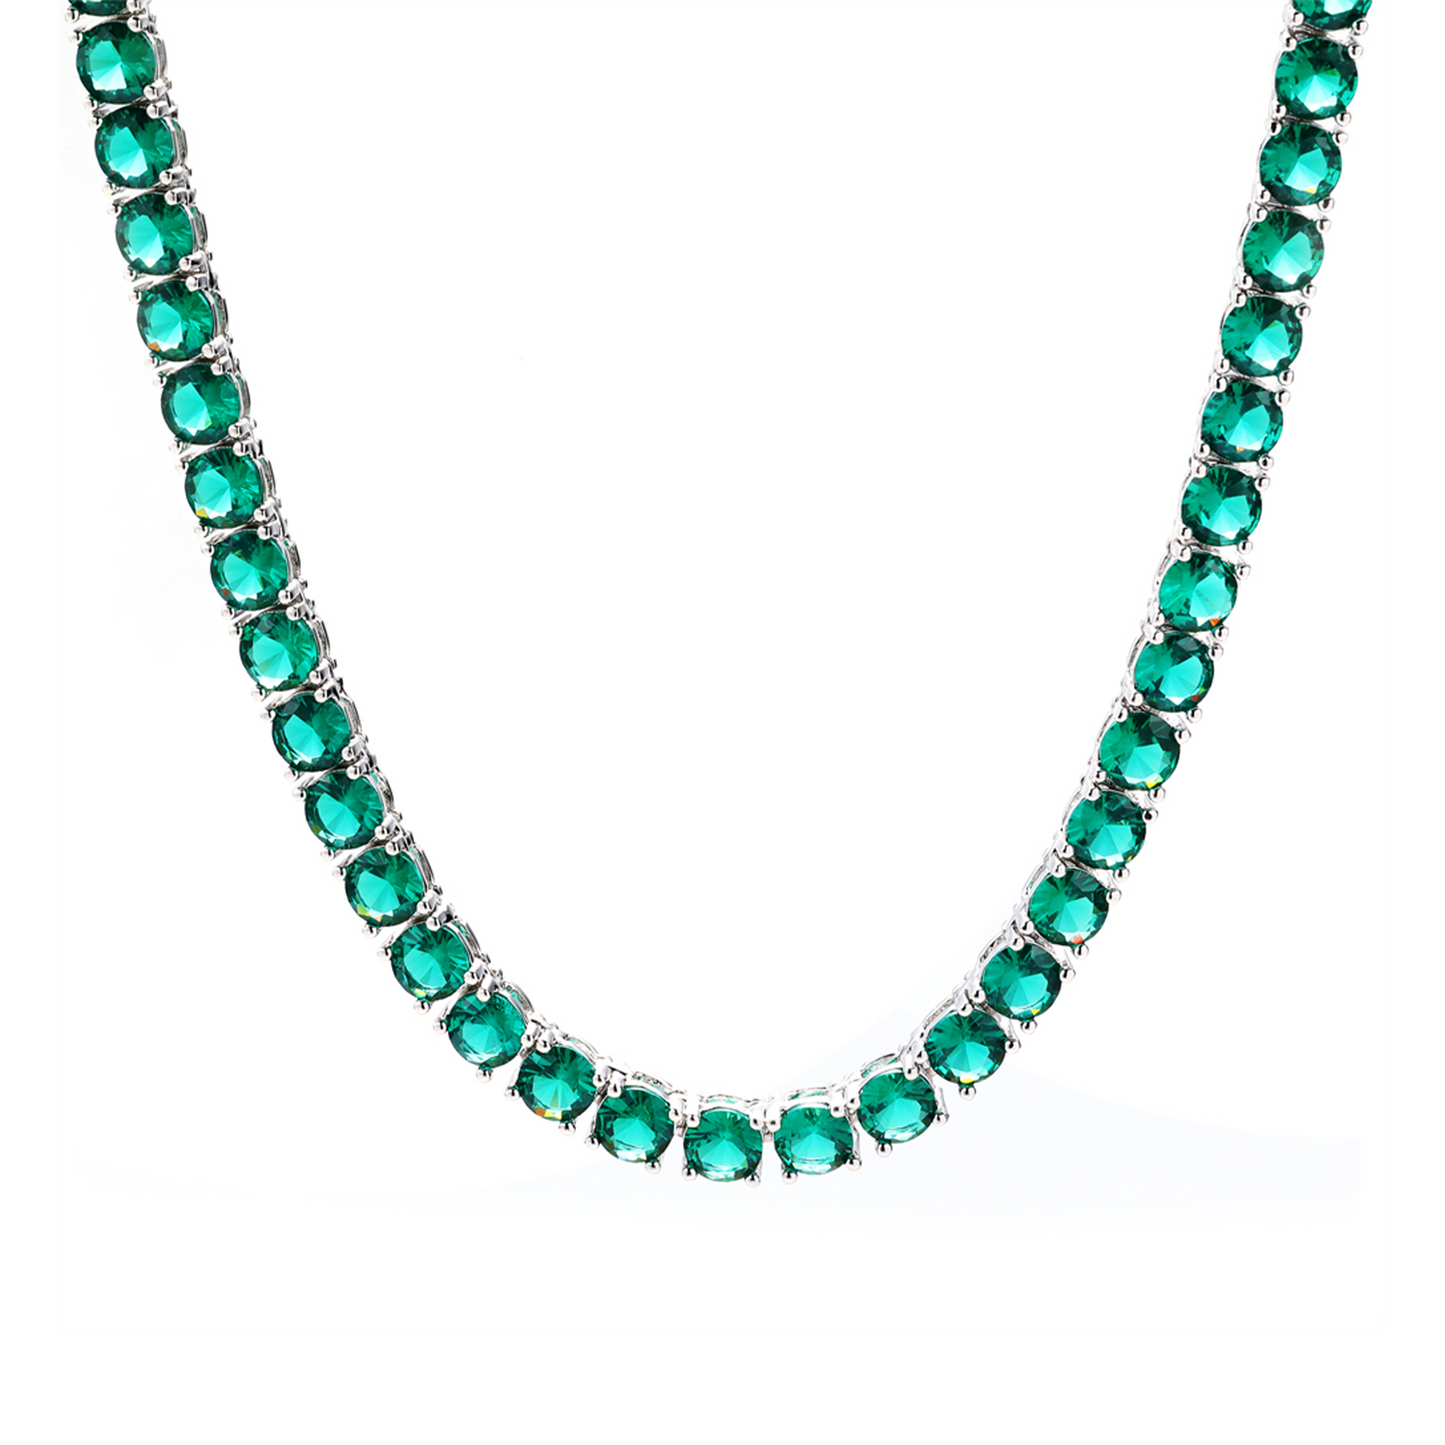 Tennis Chain With Emerald Stone In White Gold - 5mm